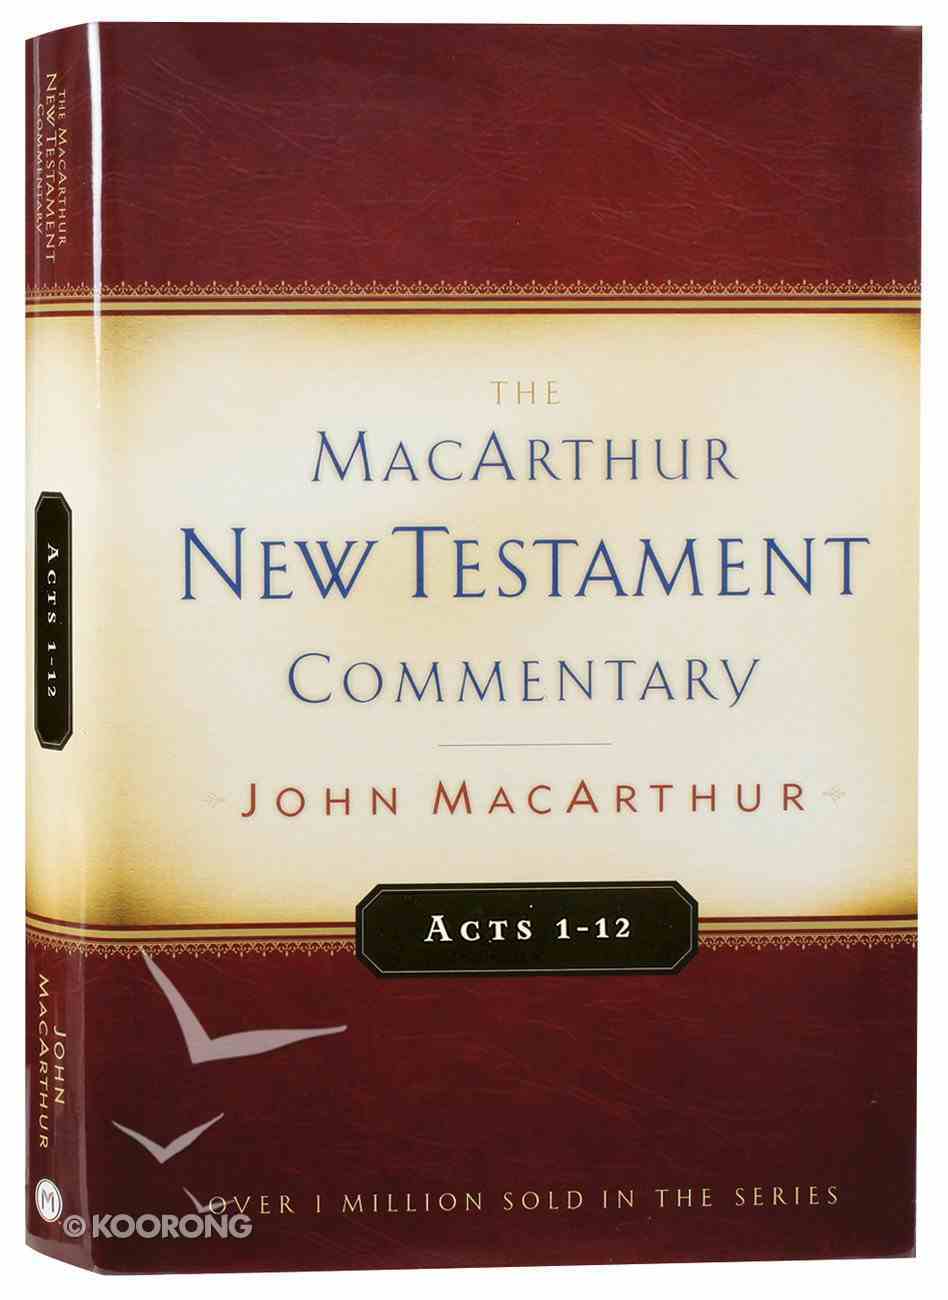 Acts 1-12 (Macarthur New Testament Commentary Series) Hardback